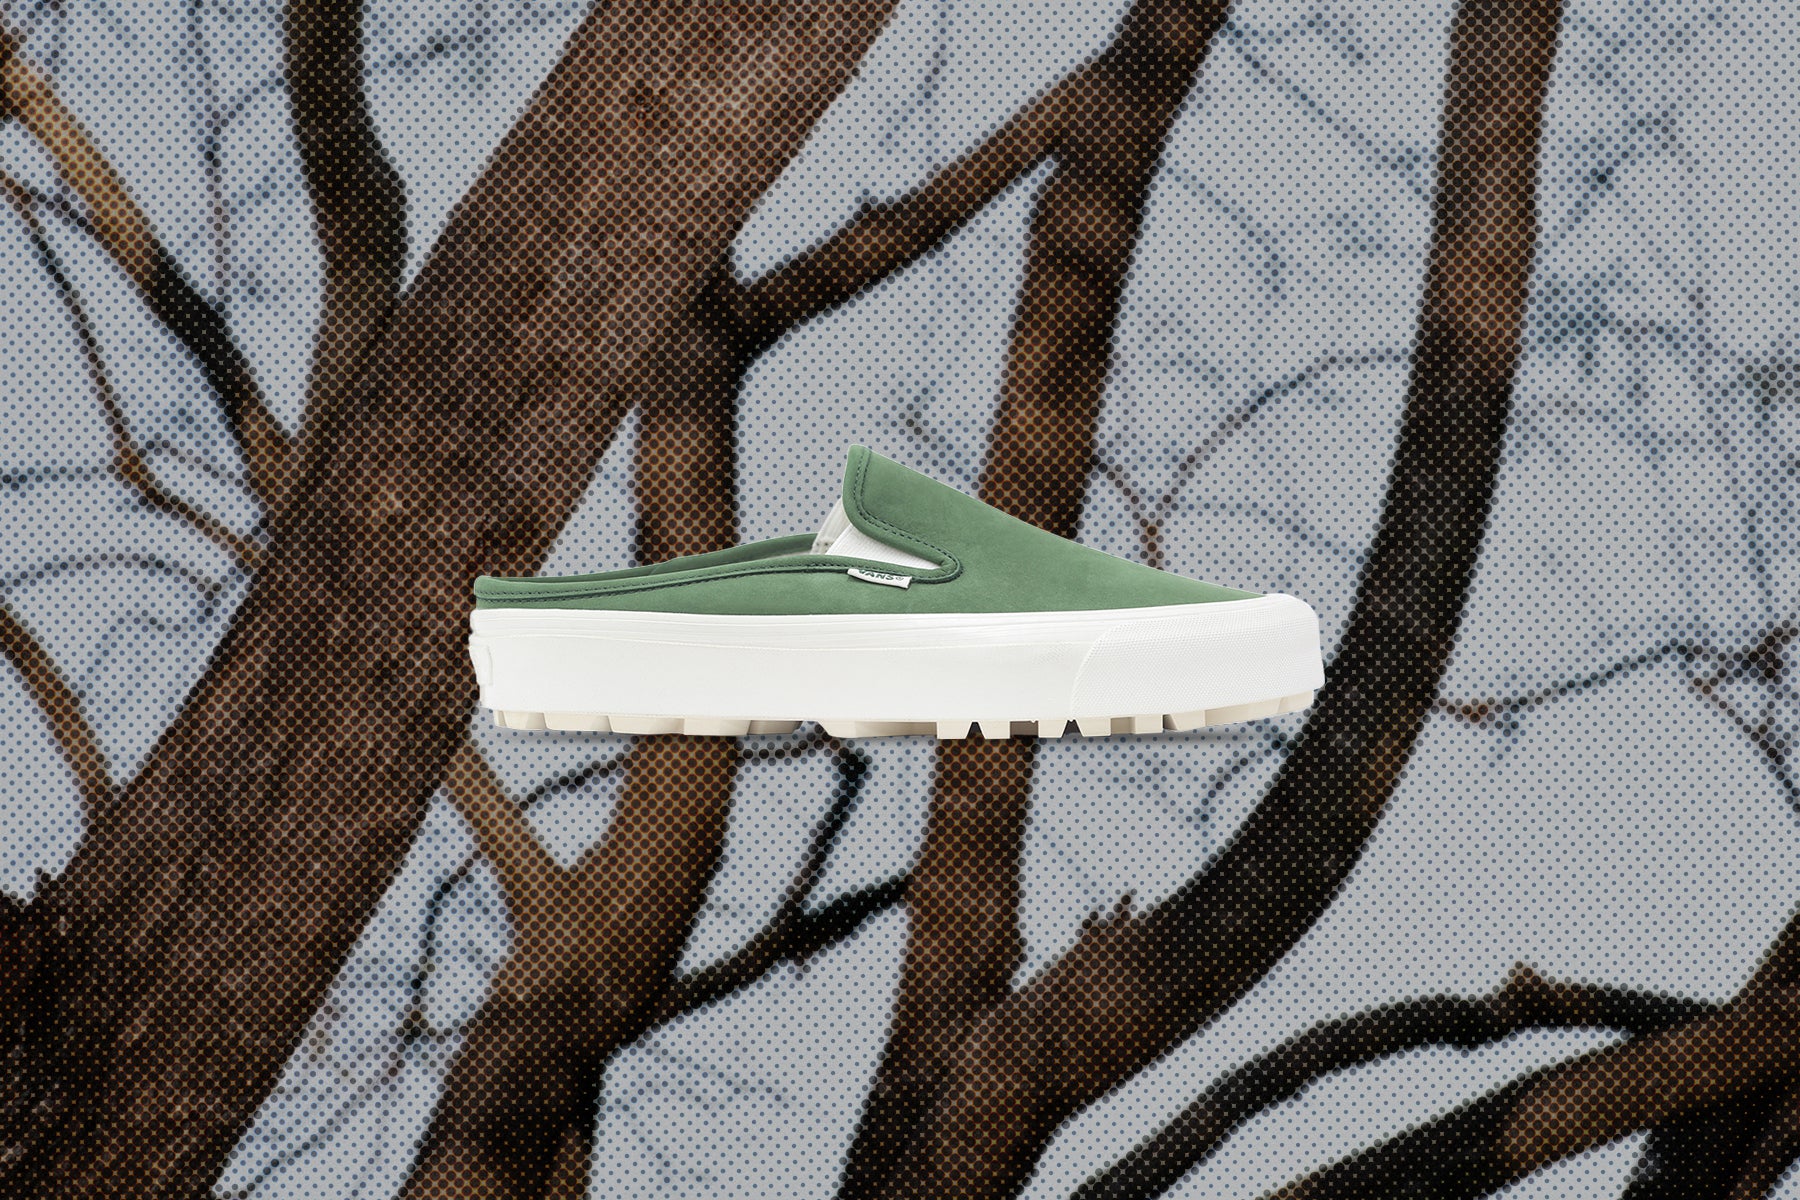 Vans Vault x Museum of Peace & Quiet OG Mule LX - Green/Marshmallow, , large image number null